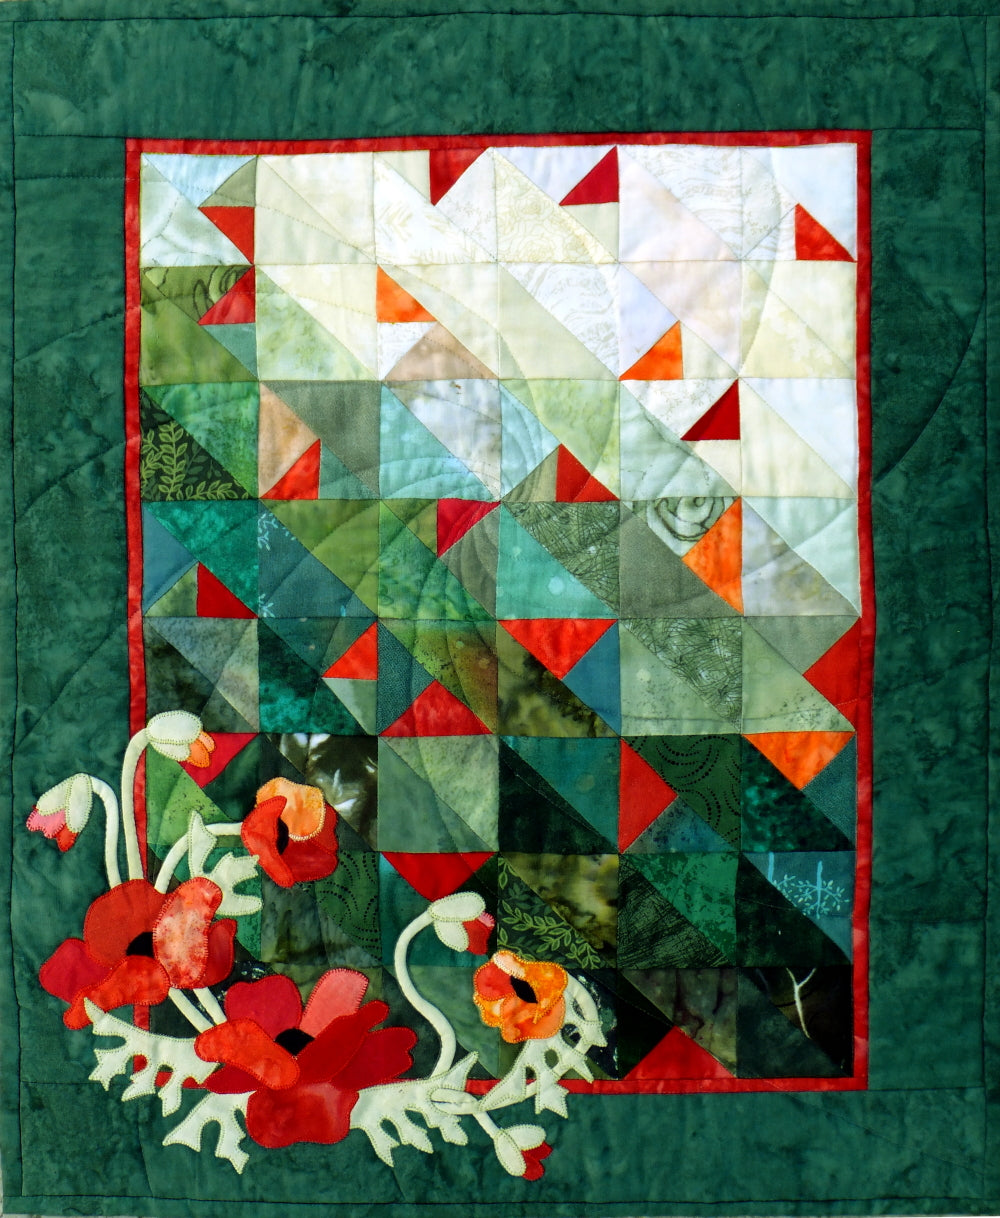 applique poppies quilt pattern by using lots of scraps. This quilt pattern has a color wash background with poppies appliqued on top